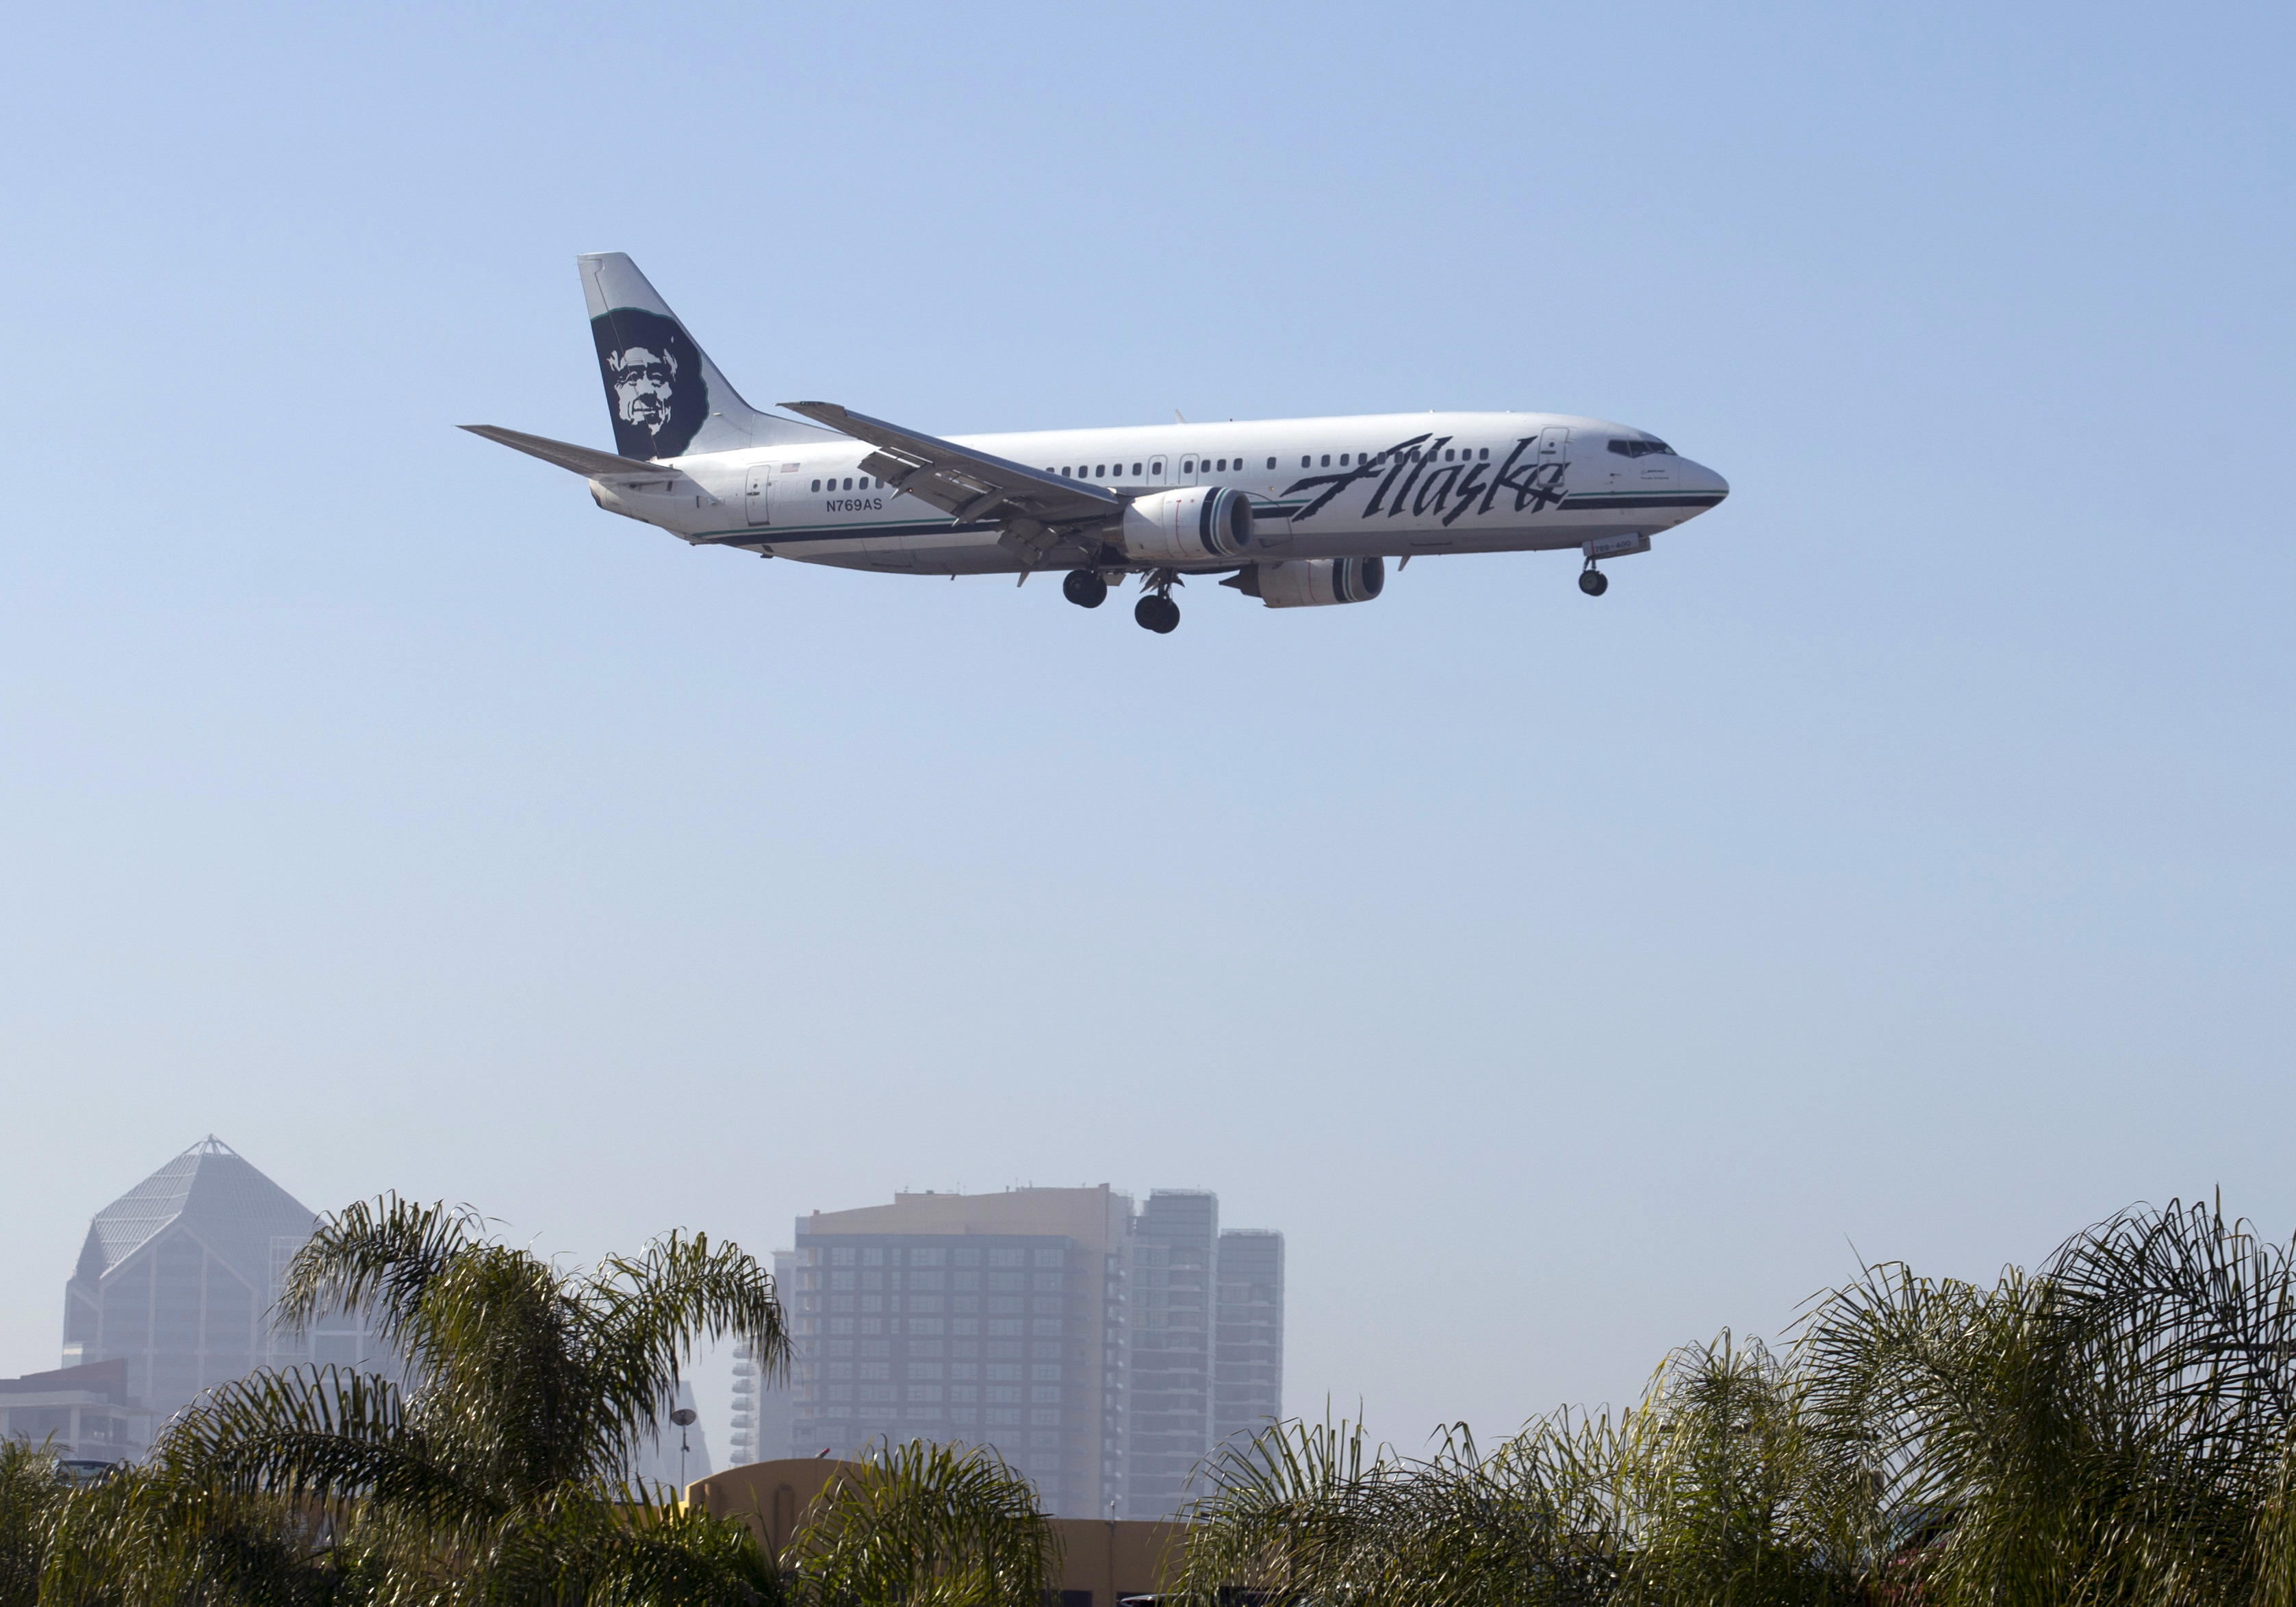 An Alaska Airlines Boeing 737 plane is shown on final approach to land in San Diego